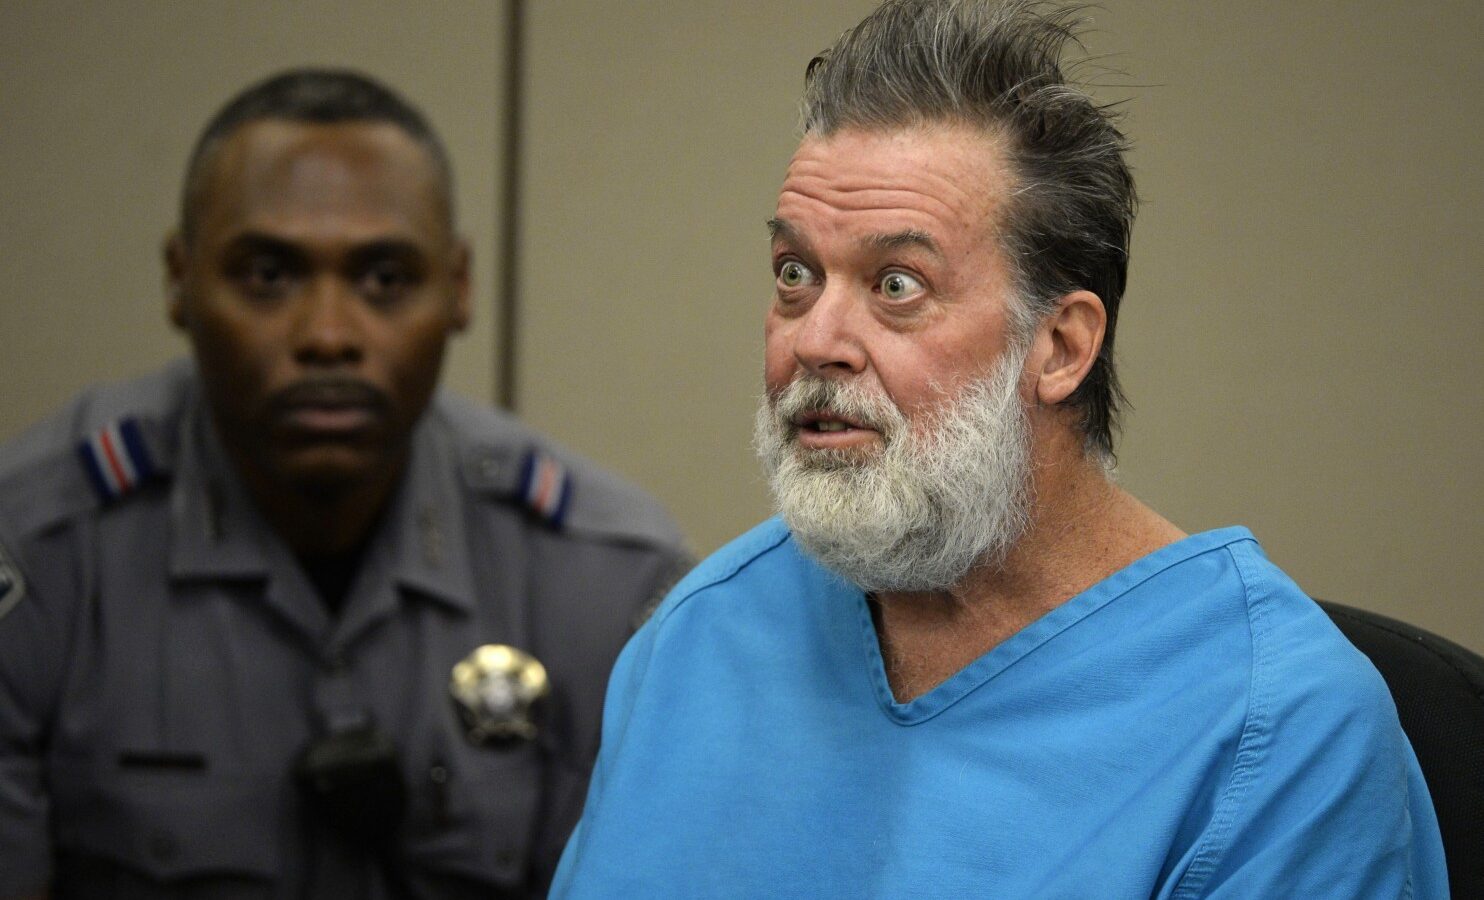 Robert Lewis Dear talks to Judge Gilbert Martinez during a court appearance on Wednesday, Dec. 9, 2015, in Colorado Springs, Colo. Dear, accused of killing three people and wounding nine others at a Colorado Springs Planned Parenthood clinic on Nov. 27, was charged with first-degree murder. (Andy Cross/The Denver Post via AP, Pool) (Associated Press)